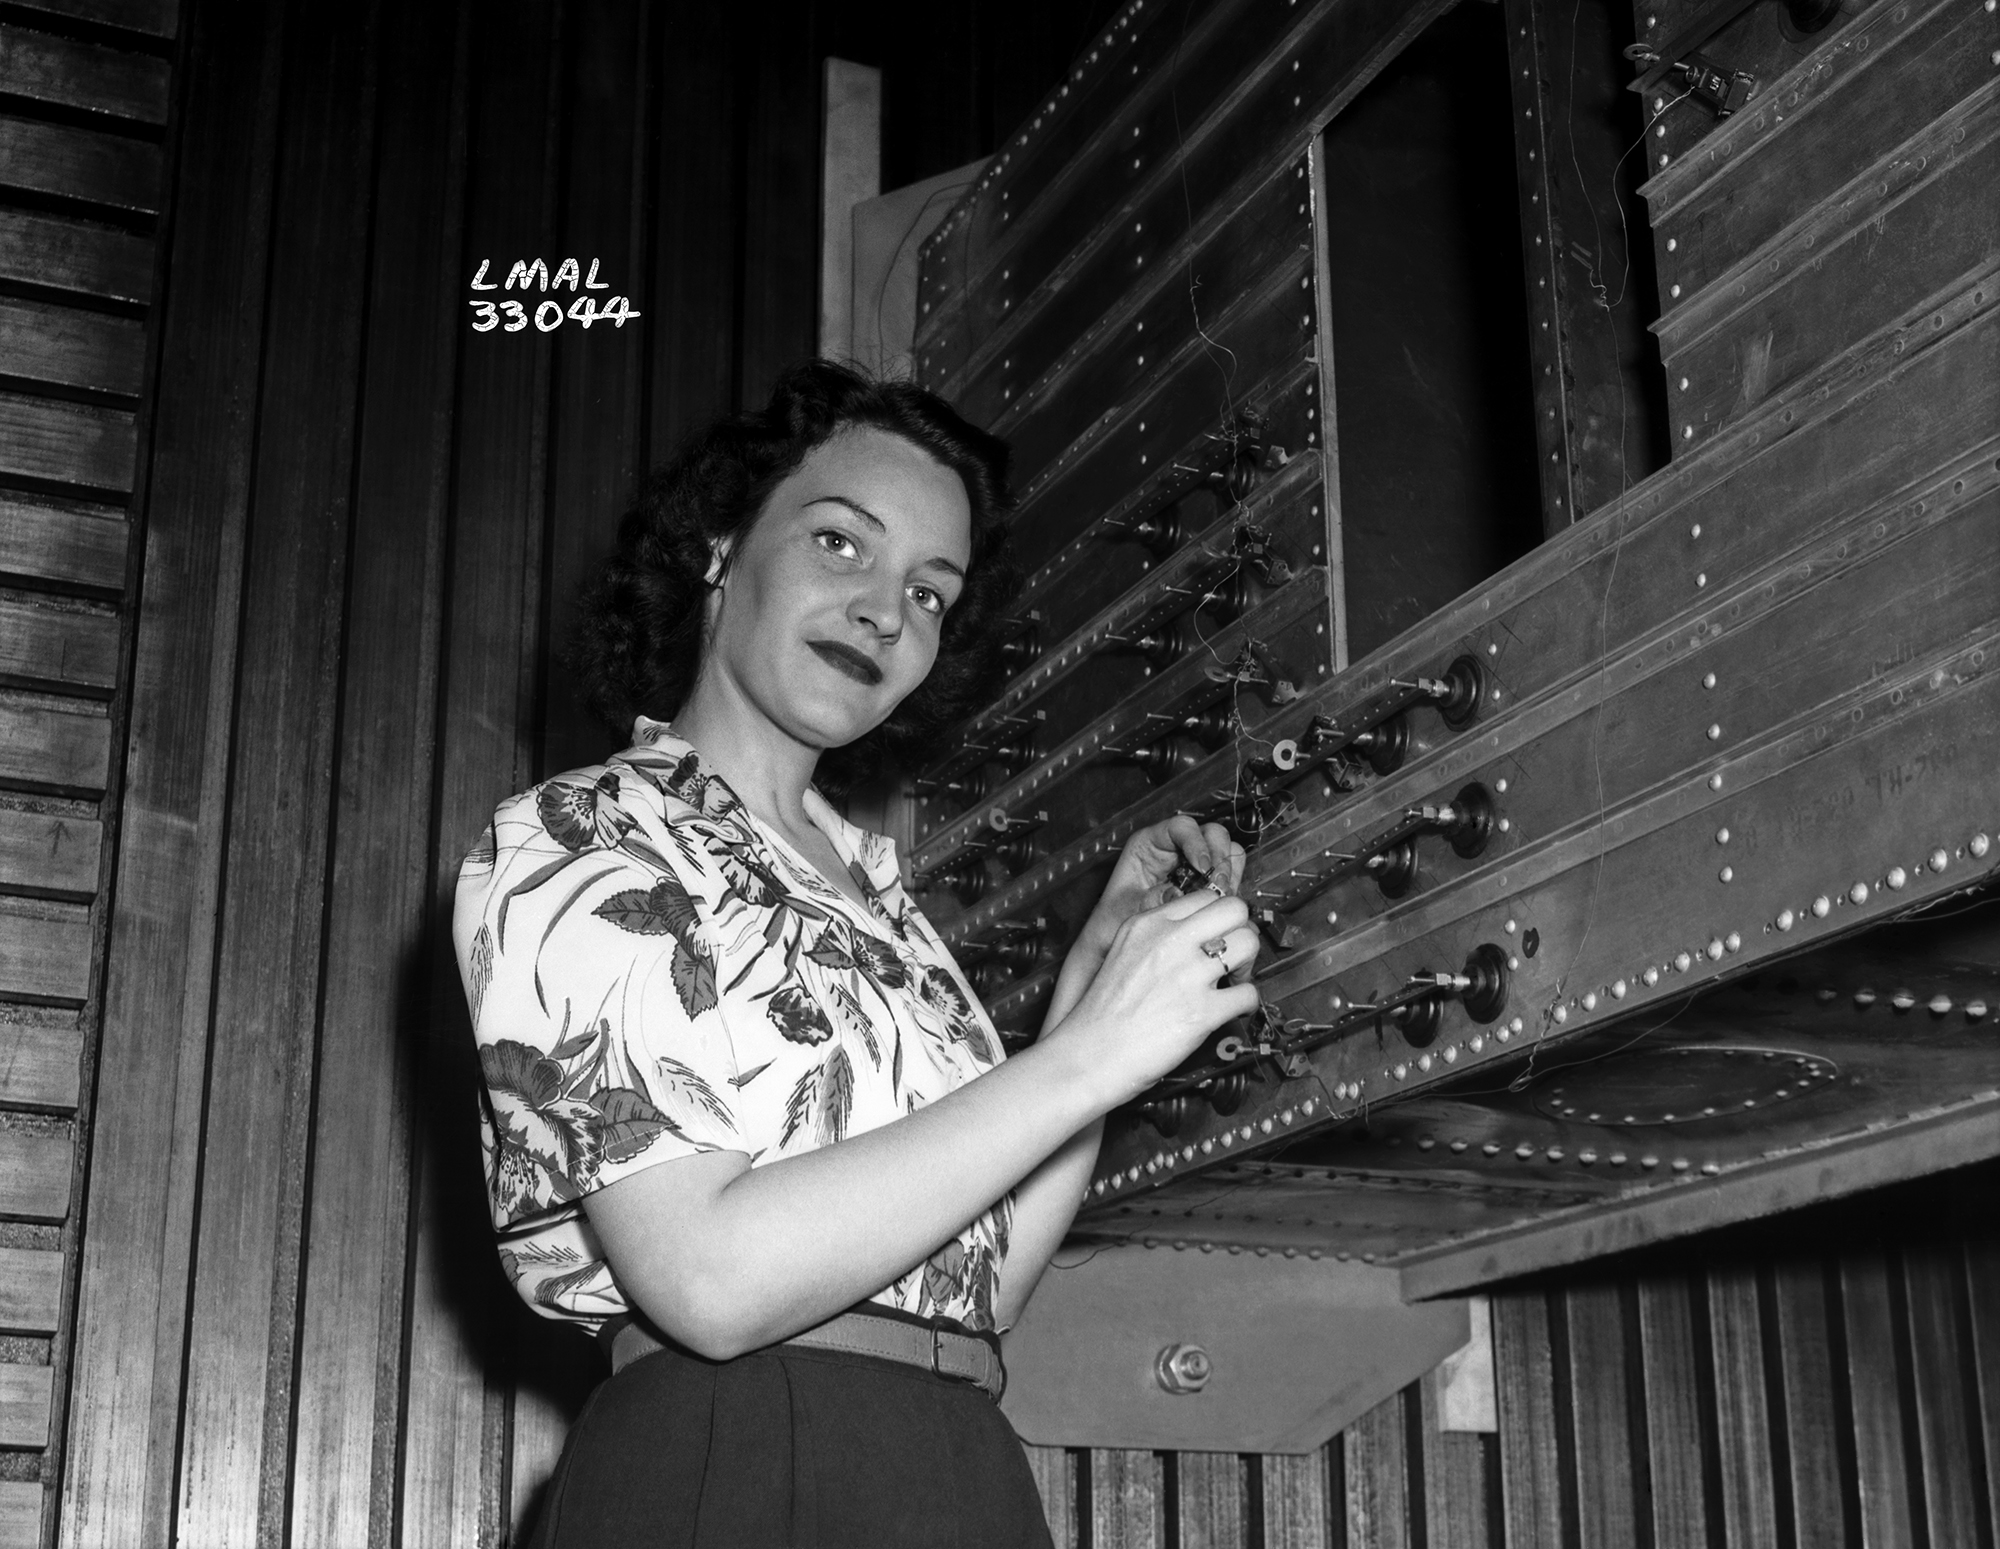 Woman working at Langley, 1943